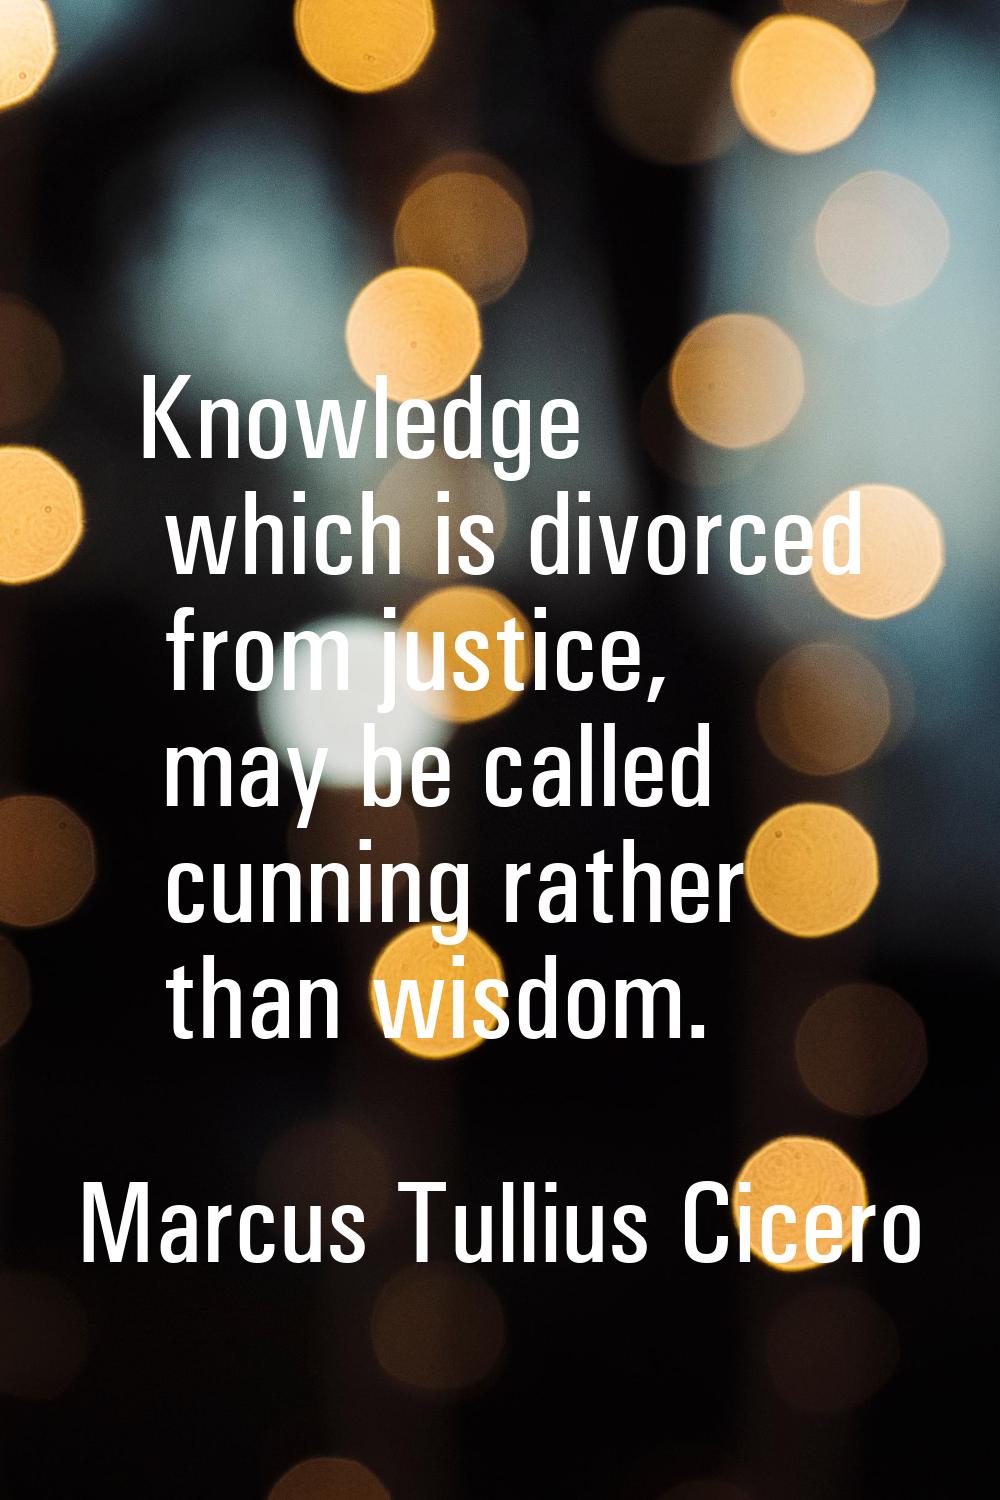 Knowledge which is divorced from justice, may be called cunning rather than wisdom.